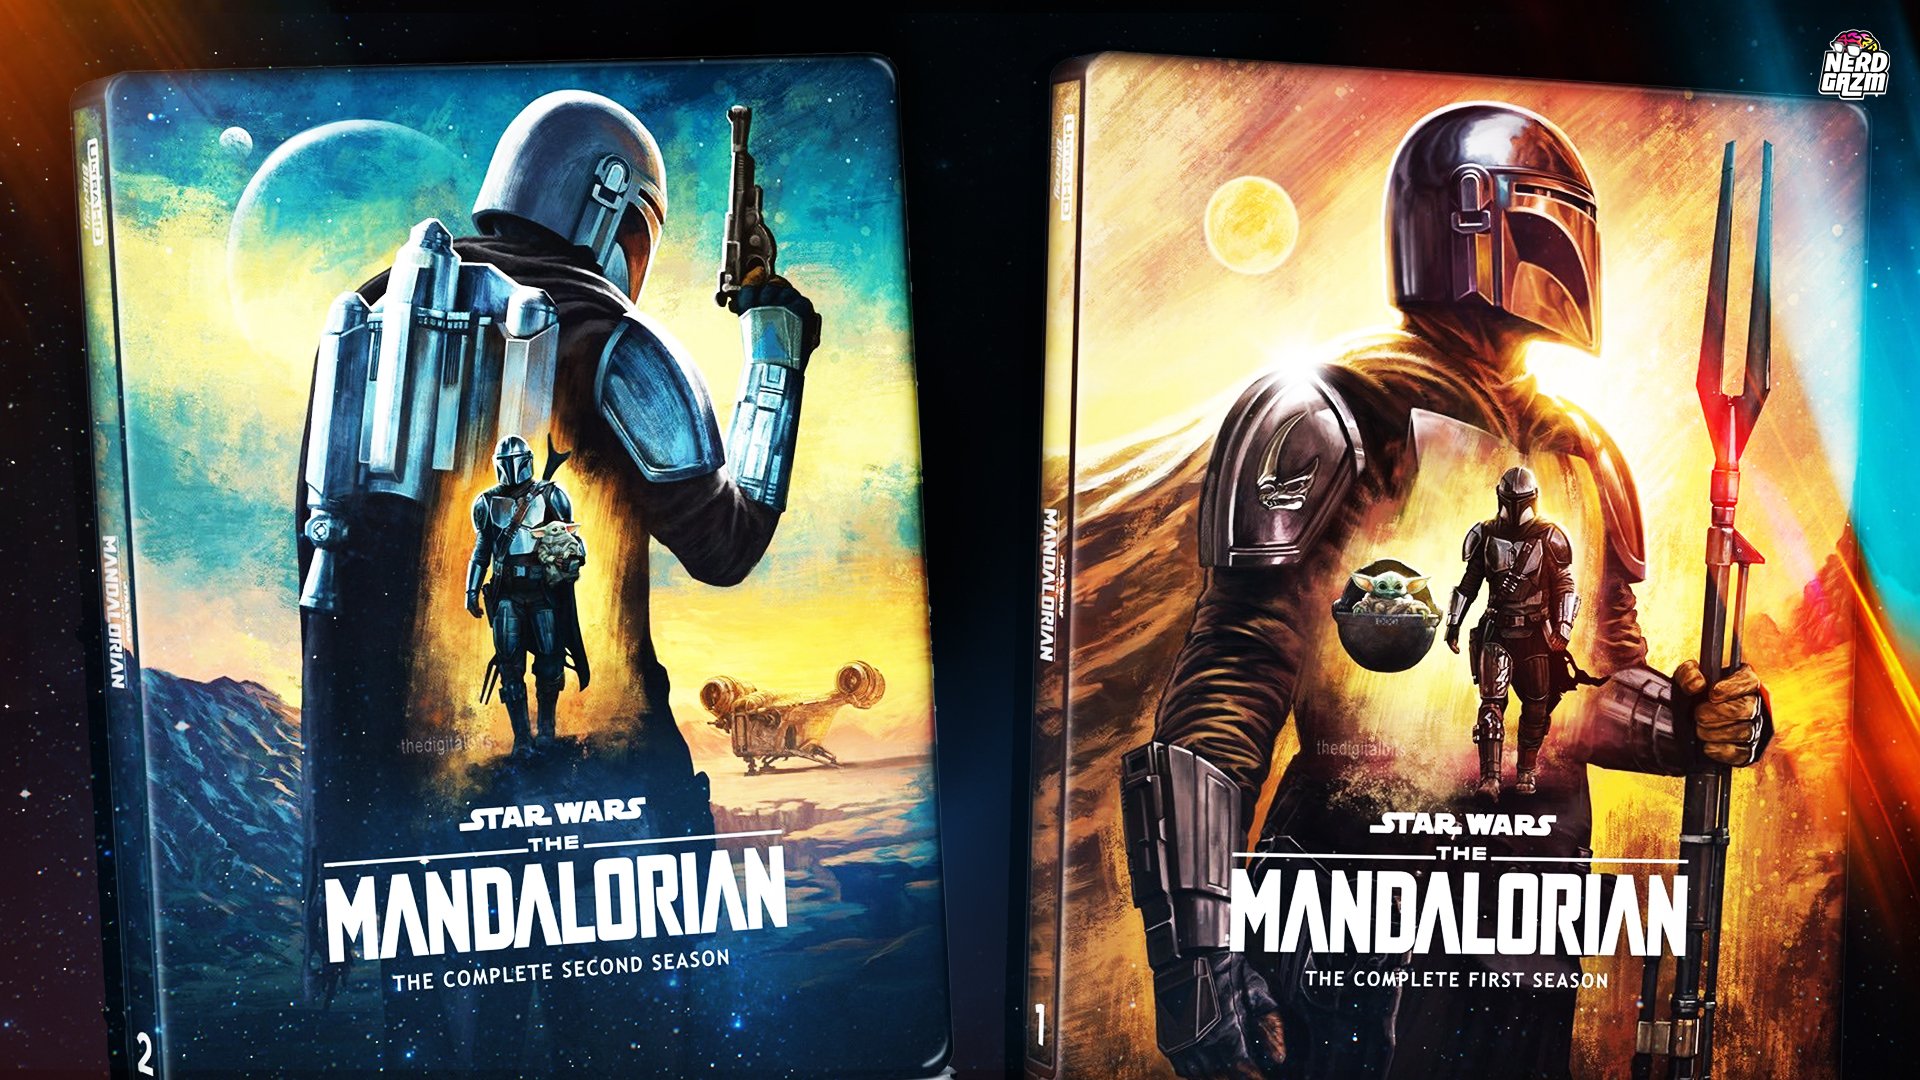 The Mandalorian: The Complete Second Season Blu-ray Overview 